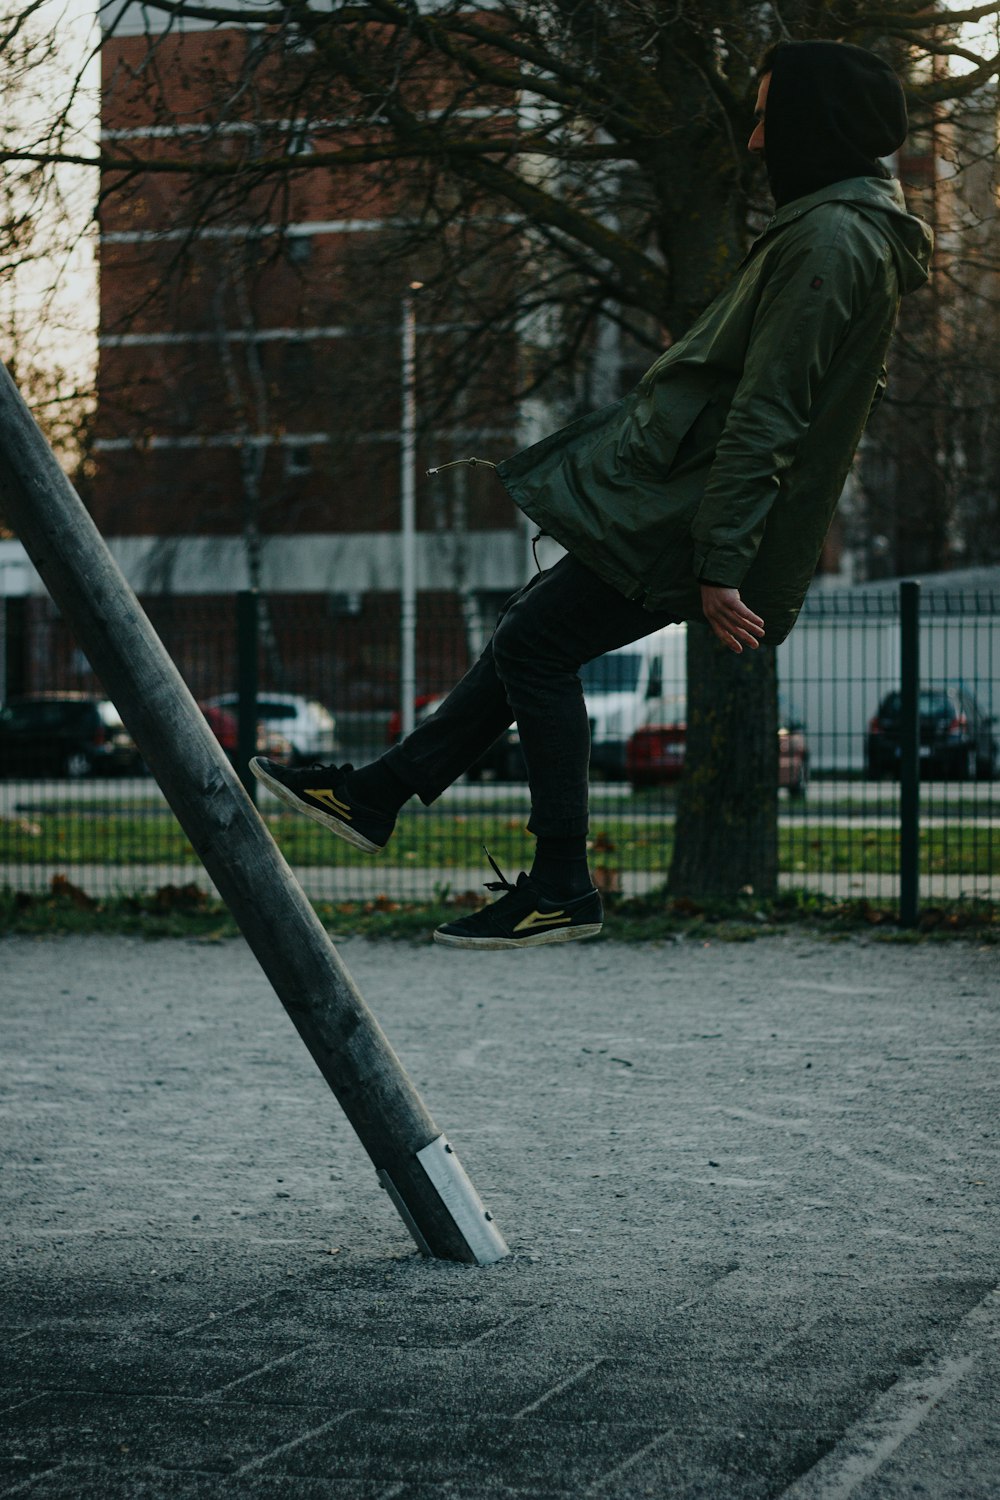 a man in a green jacket is playing on a metal pole